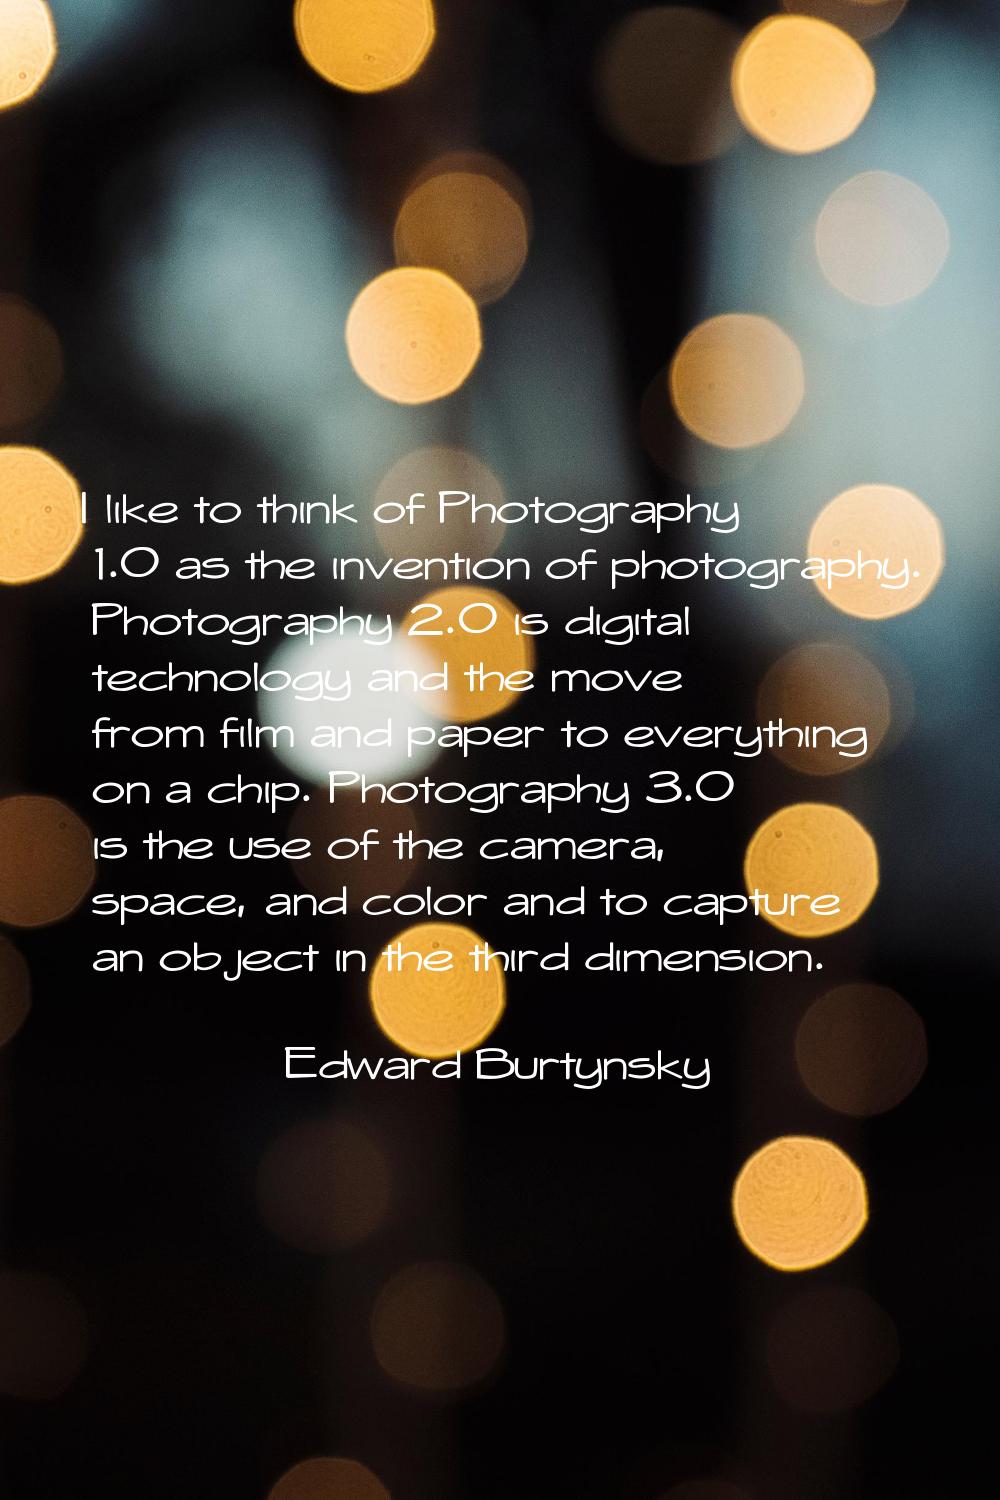 I like to think of Photography 1.0 as the invention of photography. Photography 2.0 is digital tech